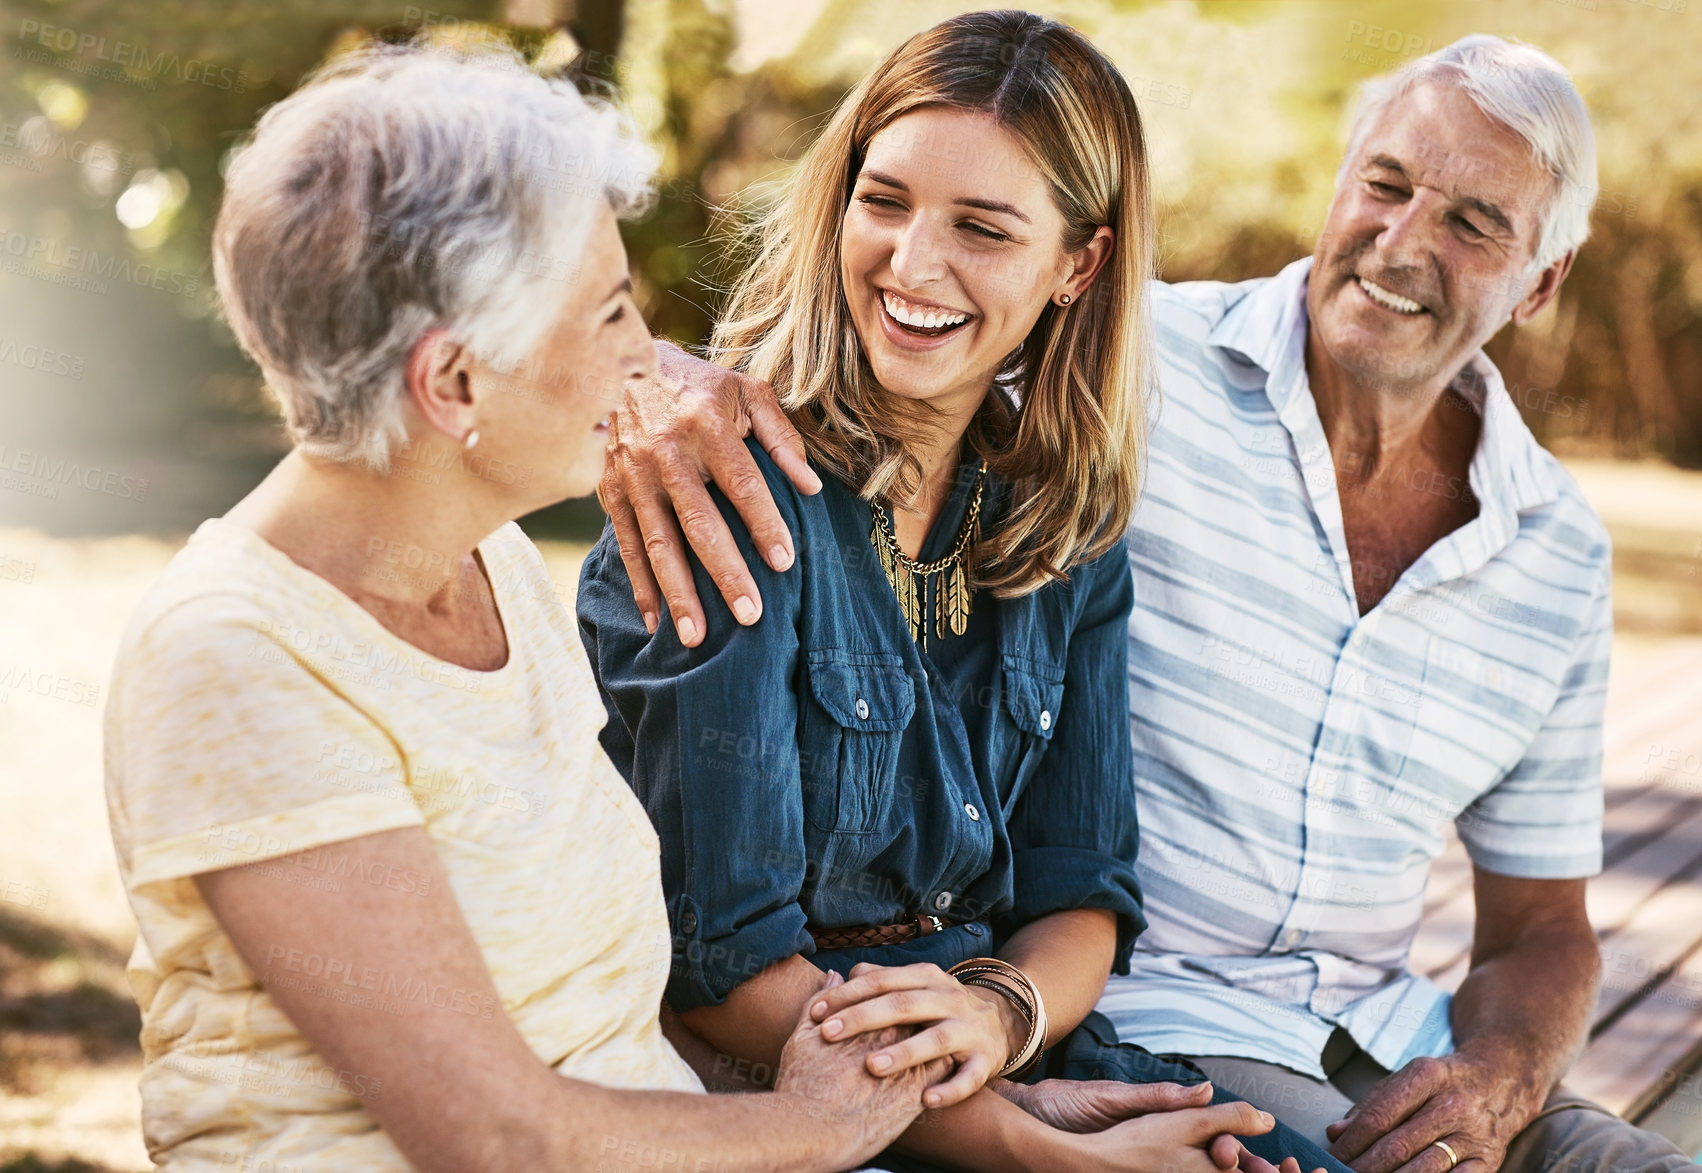 Buy stock photo Shot of a happy young woman spending quality time with her elderly parents outdoors